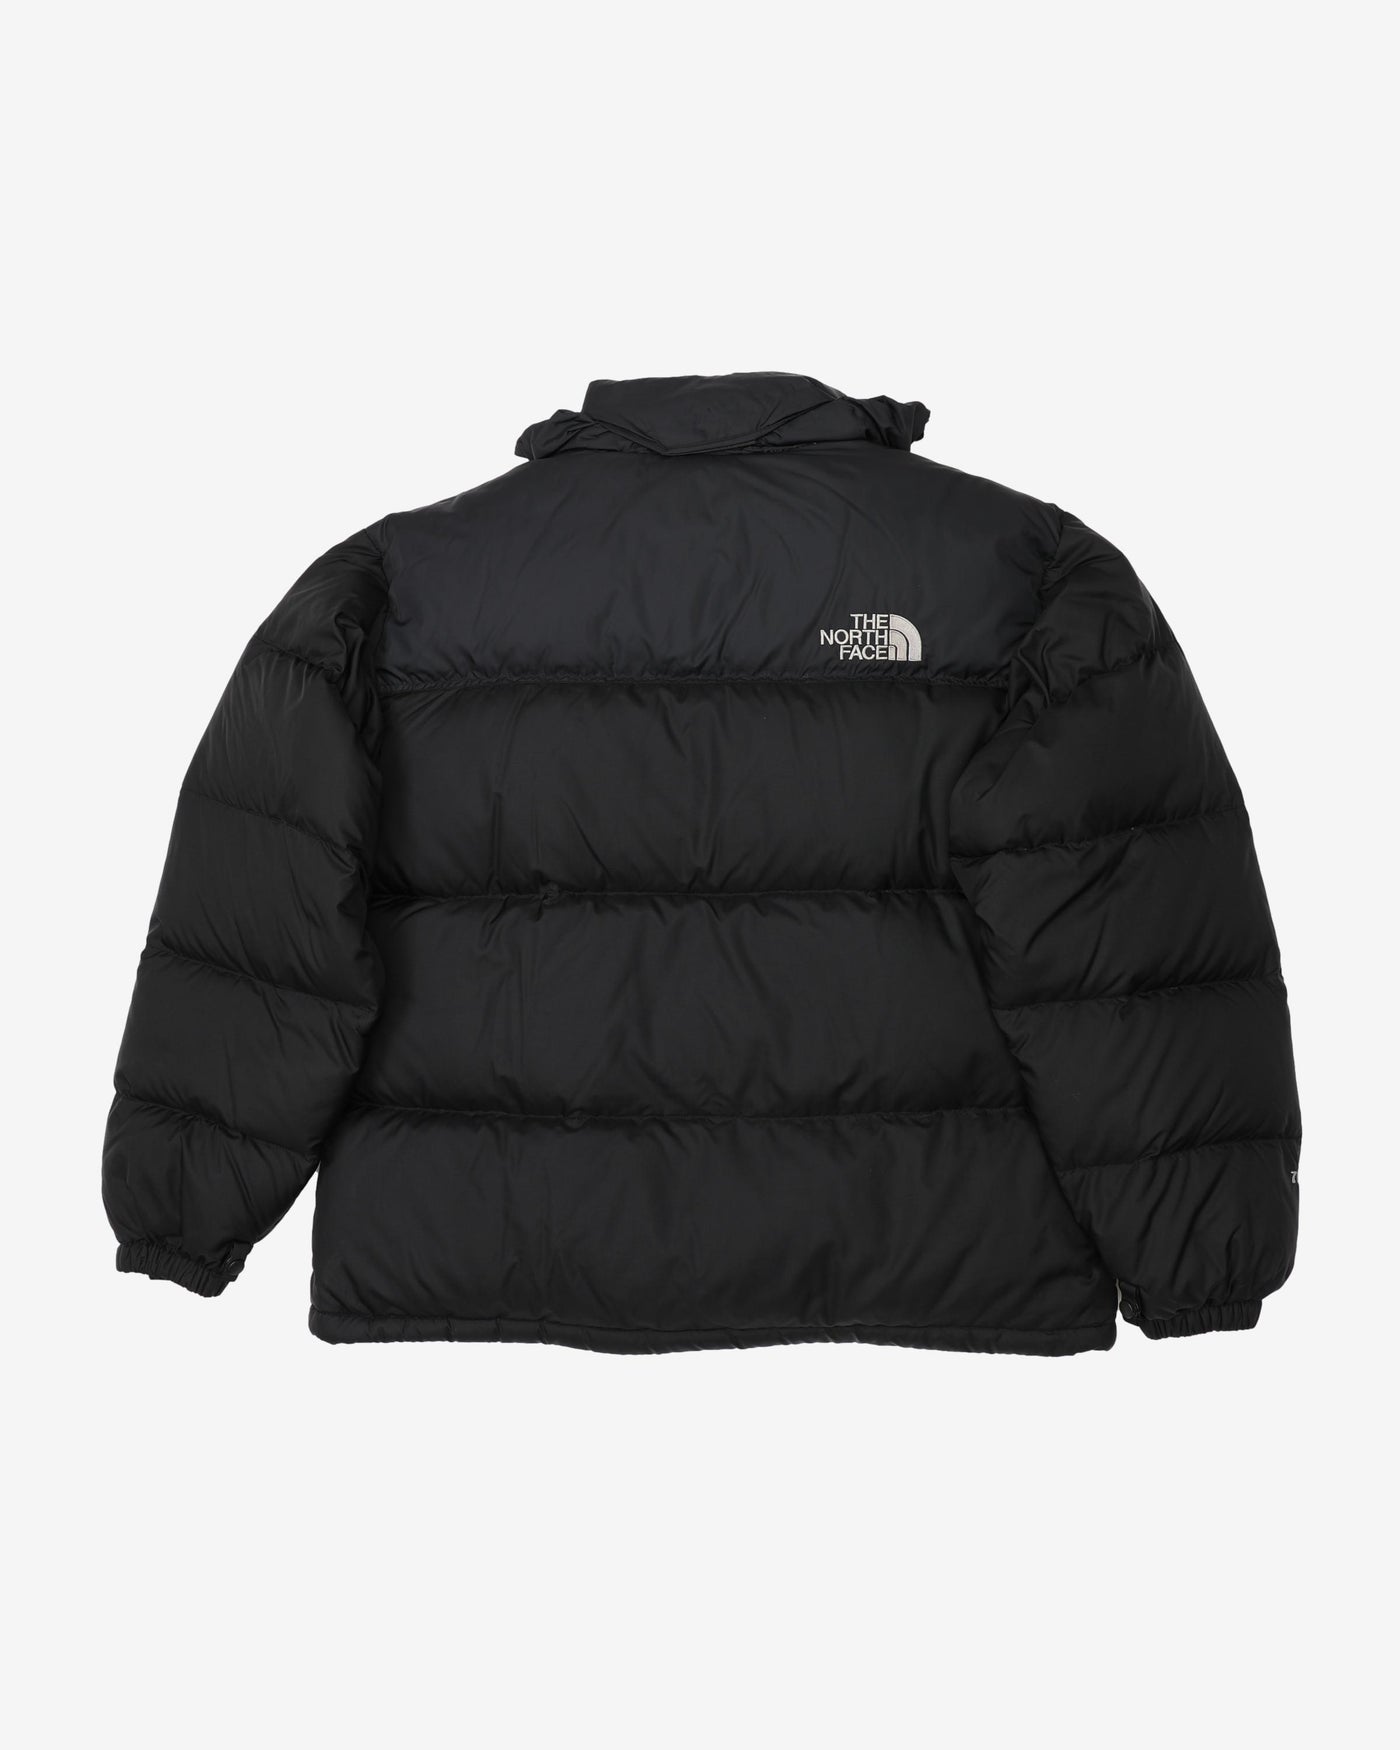 00s The North Face Black 700 Puffer / Puffa Jacket - L